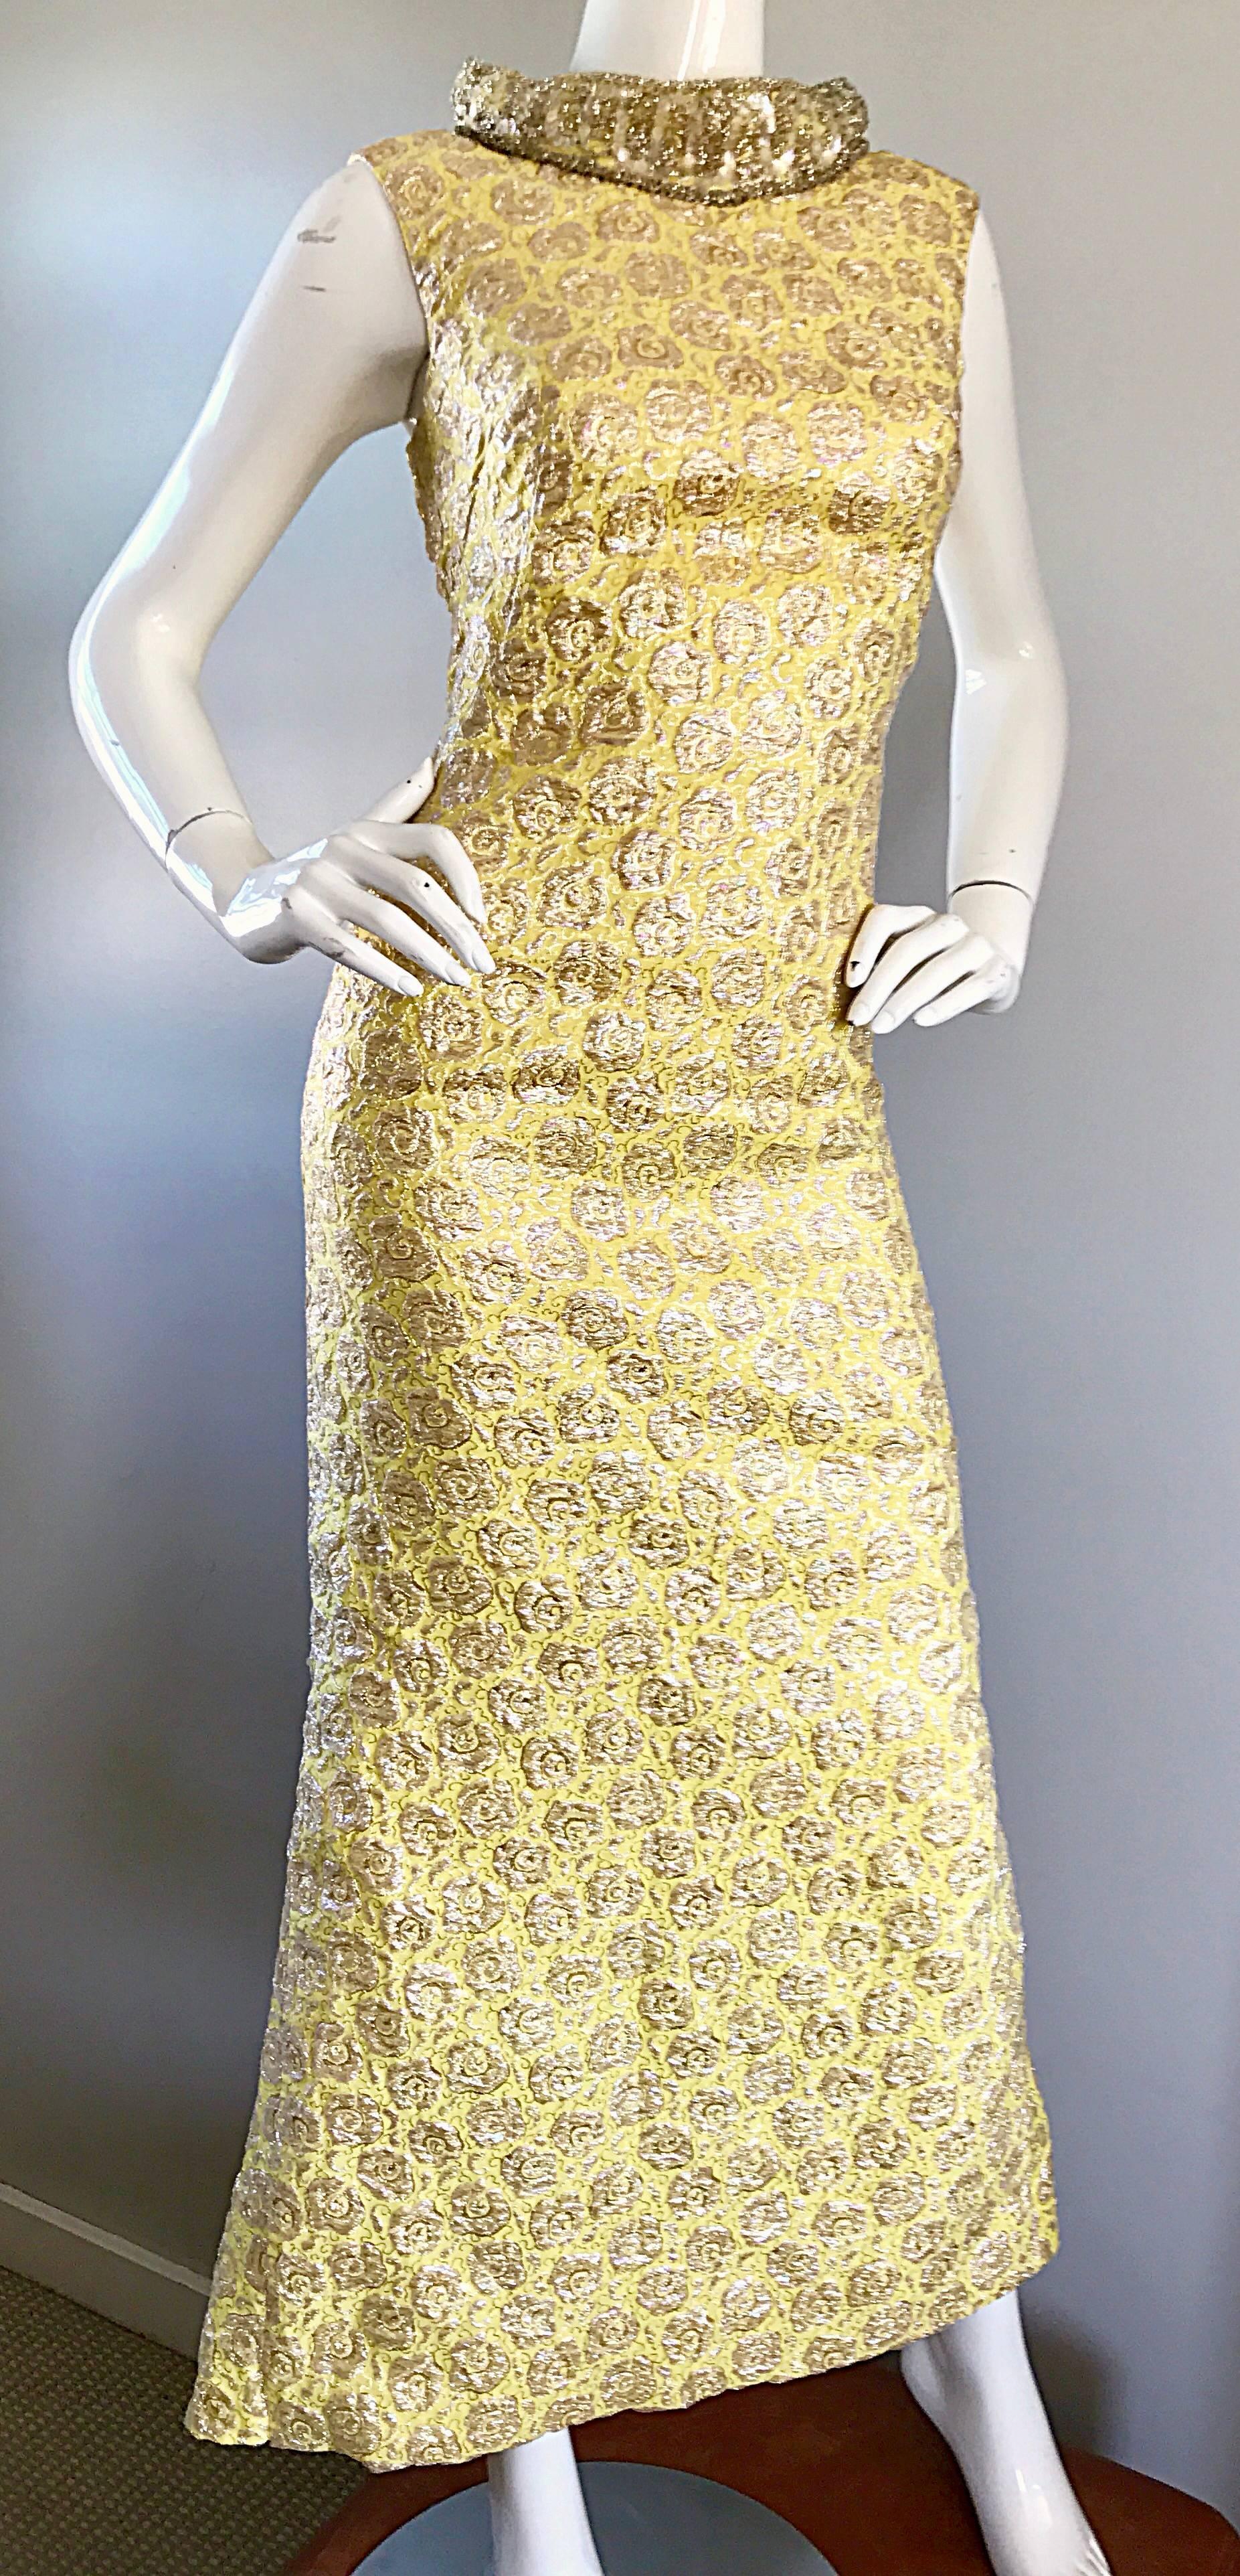 Sensational 1950s Demi Couture Yellow Beaded Silk Brocade Vintage Mermaid Gown In Excellent Condition For Sale In San Diego, CA